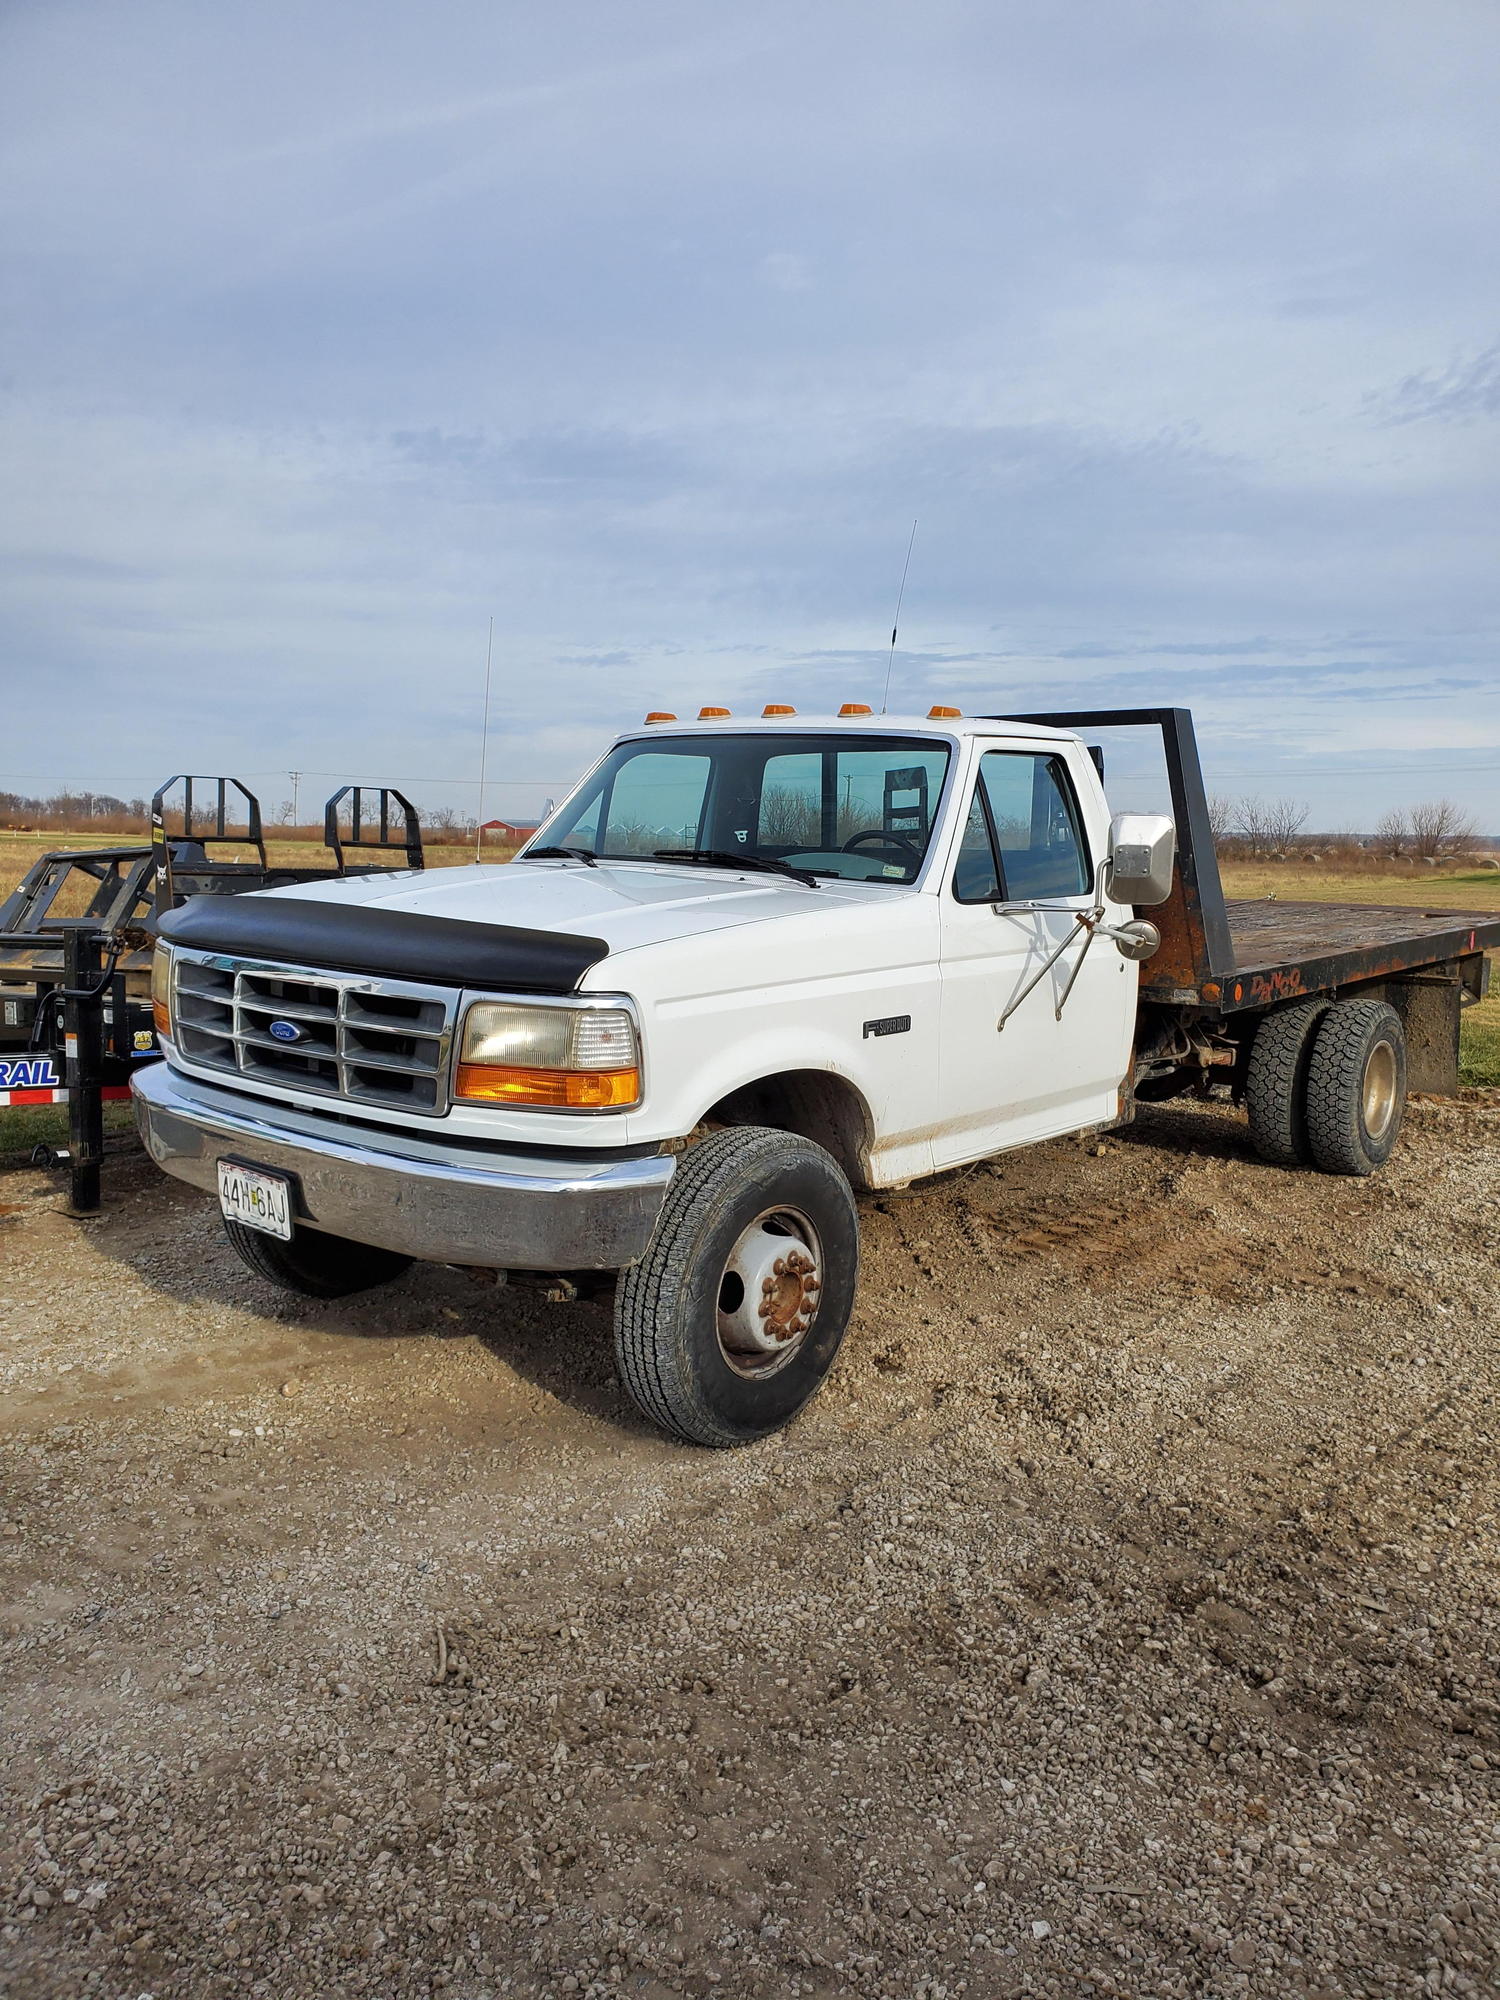 1995 Ford F Super Duty - F450 Rollback - Used - VIN 1FDLF47G2SEA5597 - 126,000 Miles - 8 cyl - 2WD - Manual - Truck - White - Jerseyville, IL 62052, United States